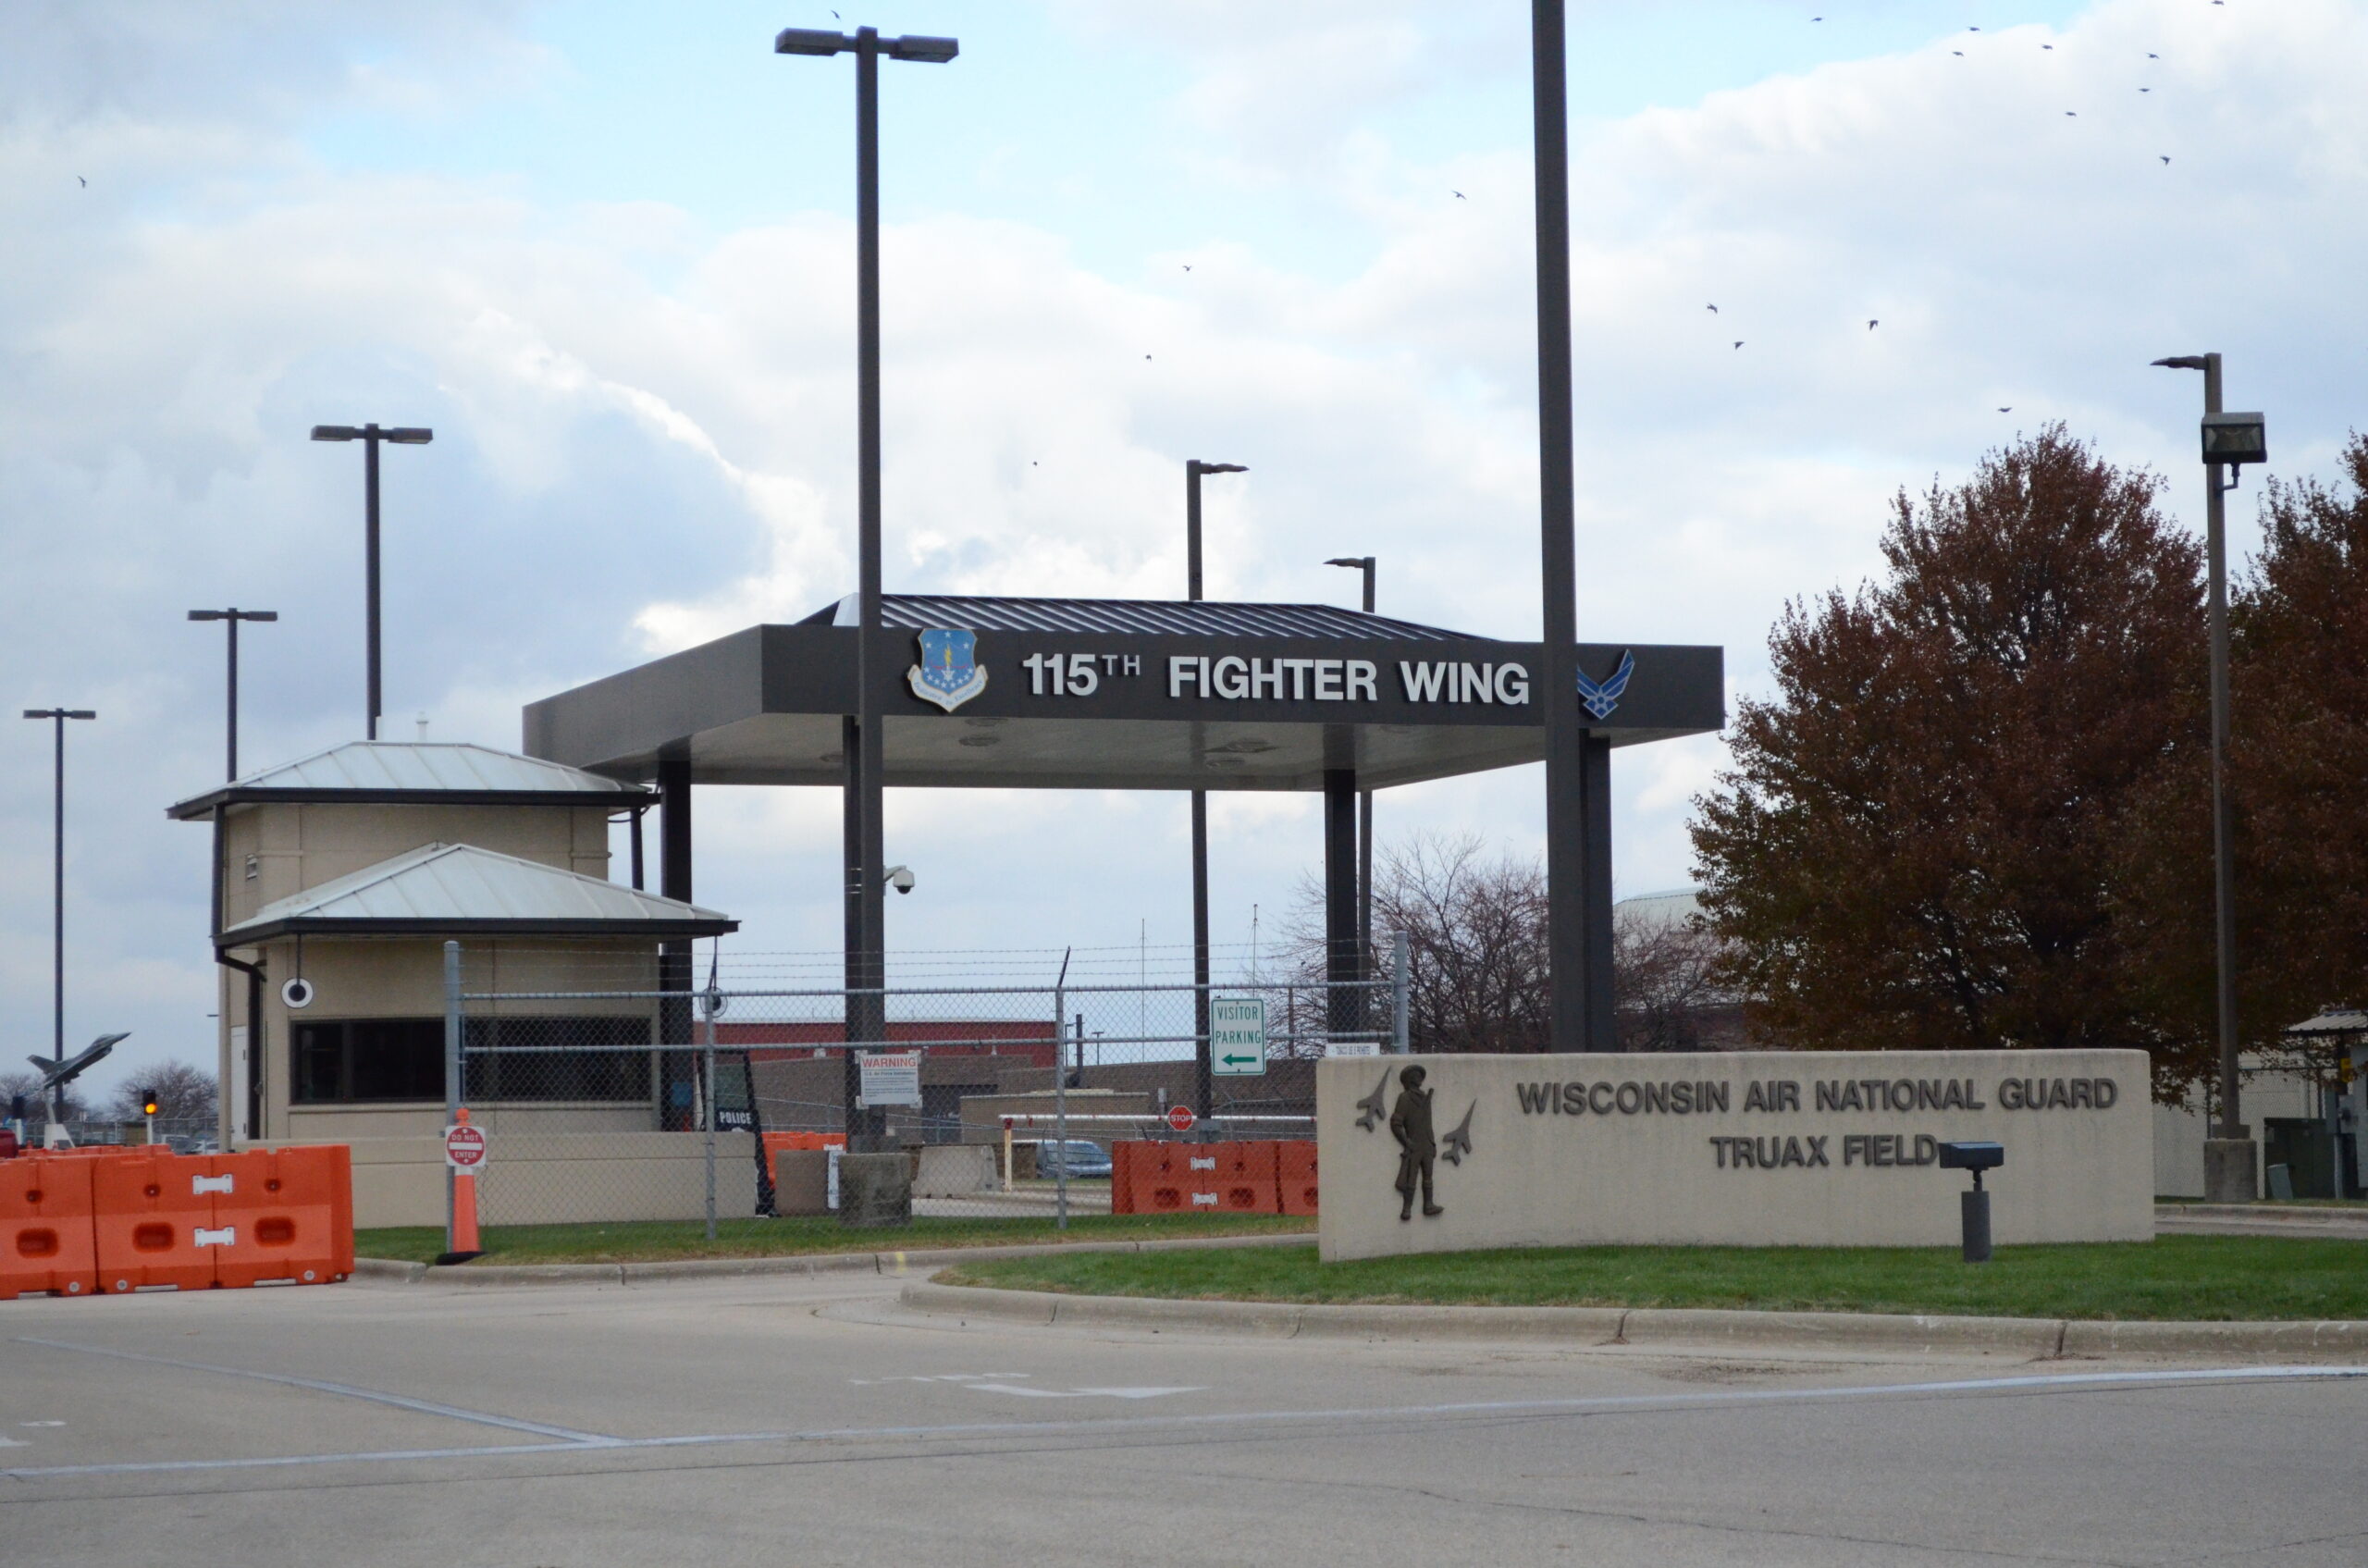 A sign for the Truax Field Air National Guard Base stands before a larger sign for the 115th Fighter Wing.